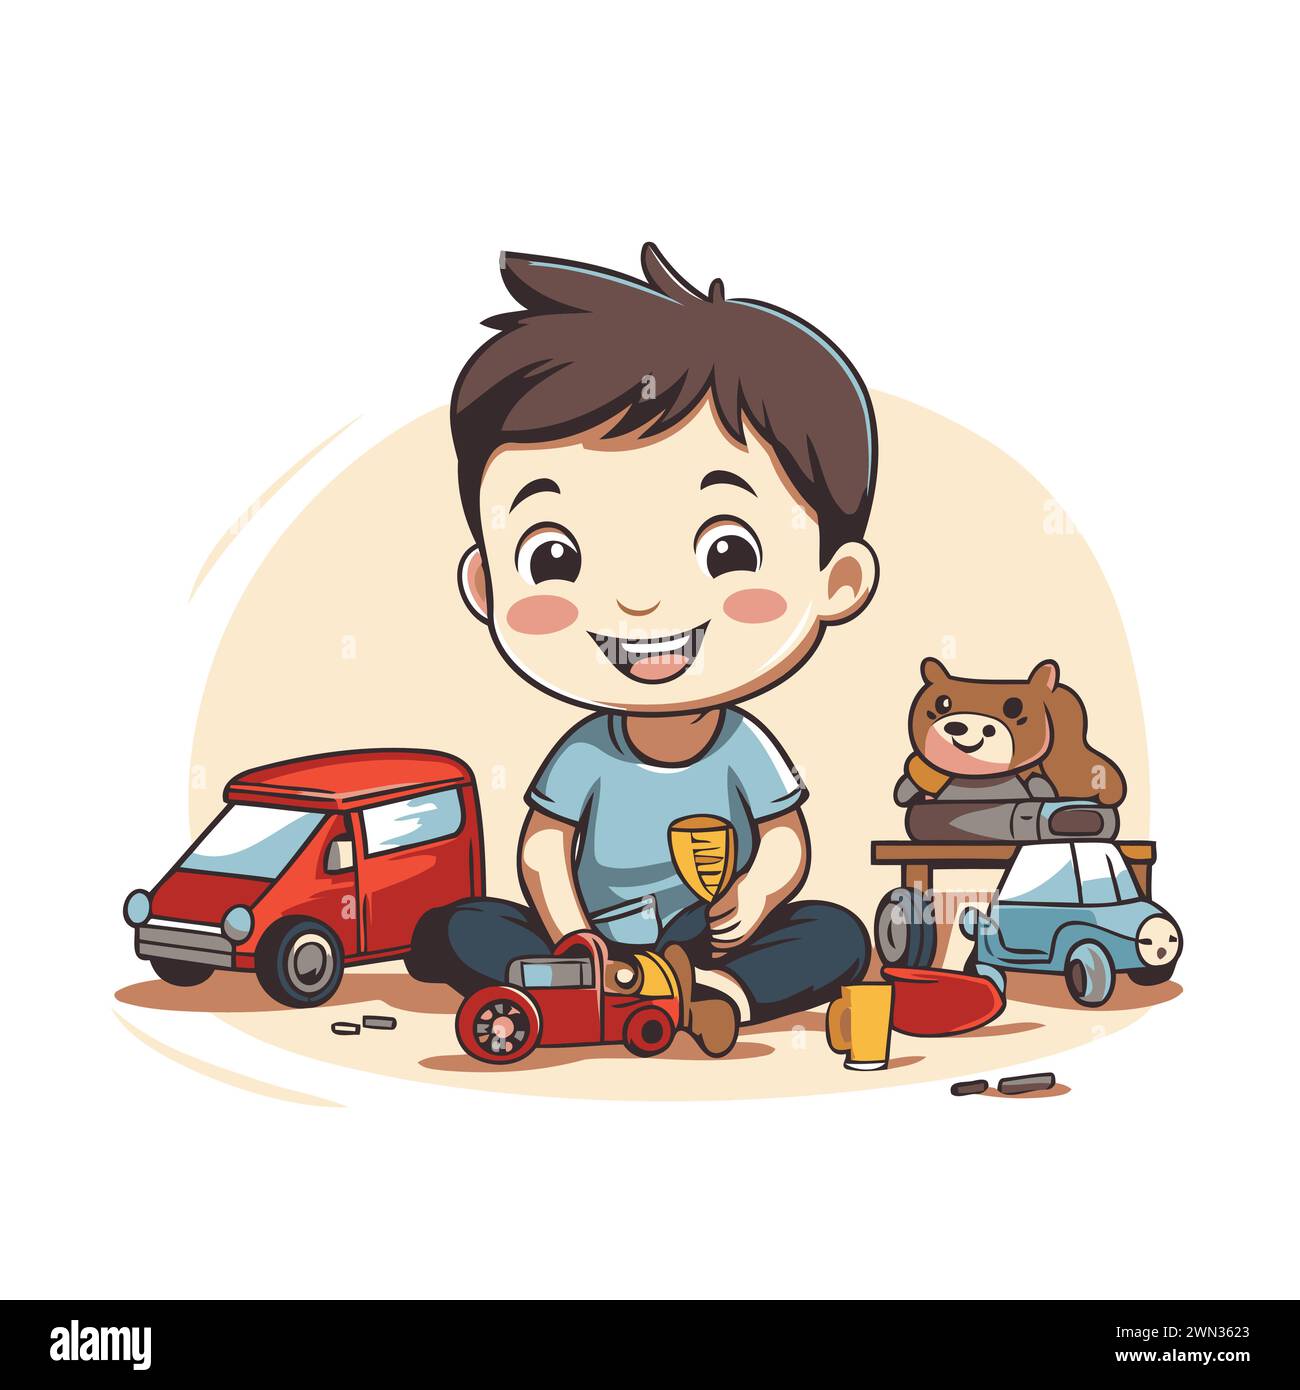 Cute little boy playing with a toy car. Vector illustration. Stock Vector